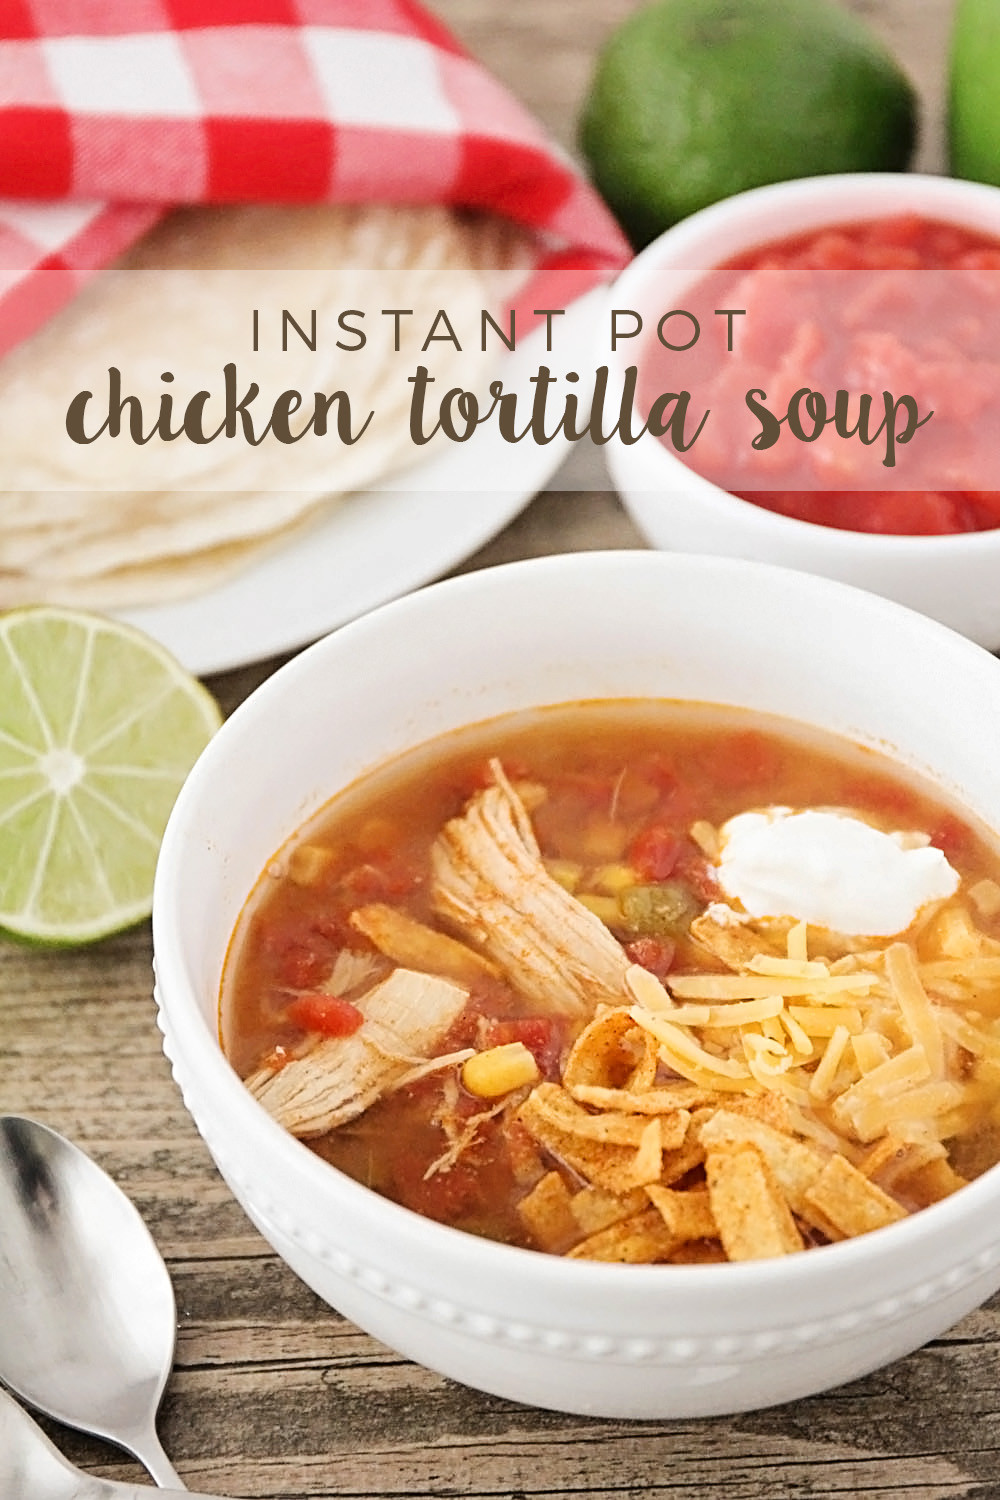 Whole Chicken Soup Instant Pot
 The Baker Upstairs Instant Pot Chicken Tortilla Soup